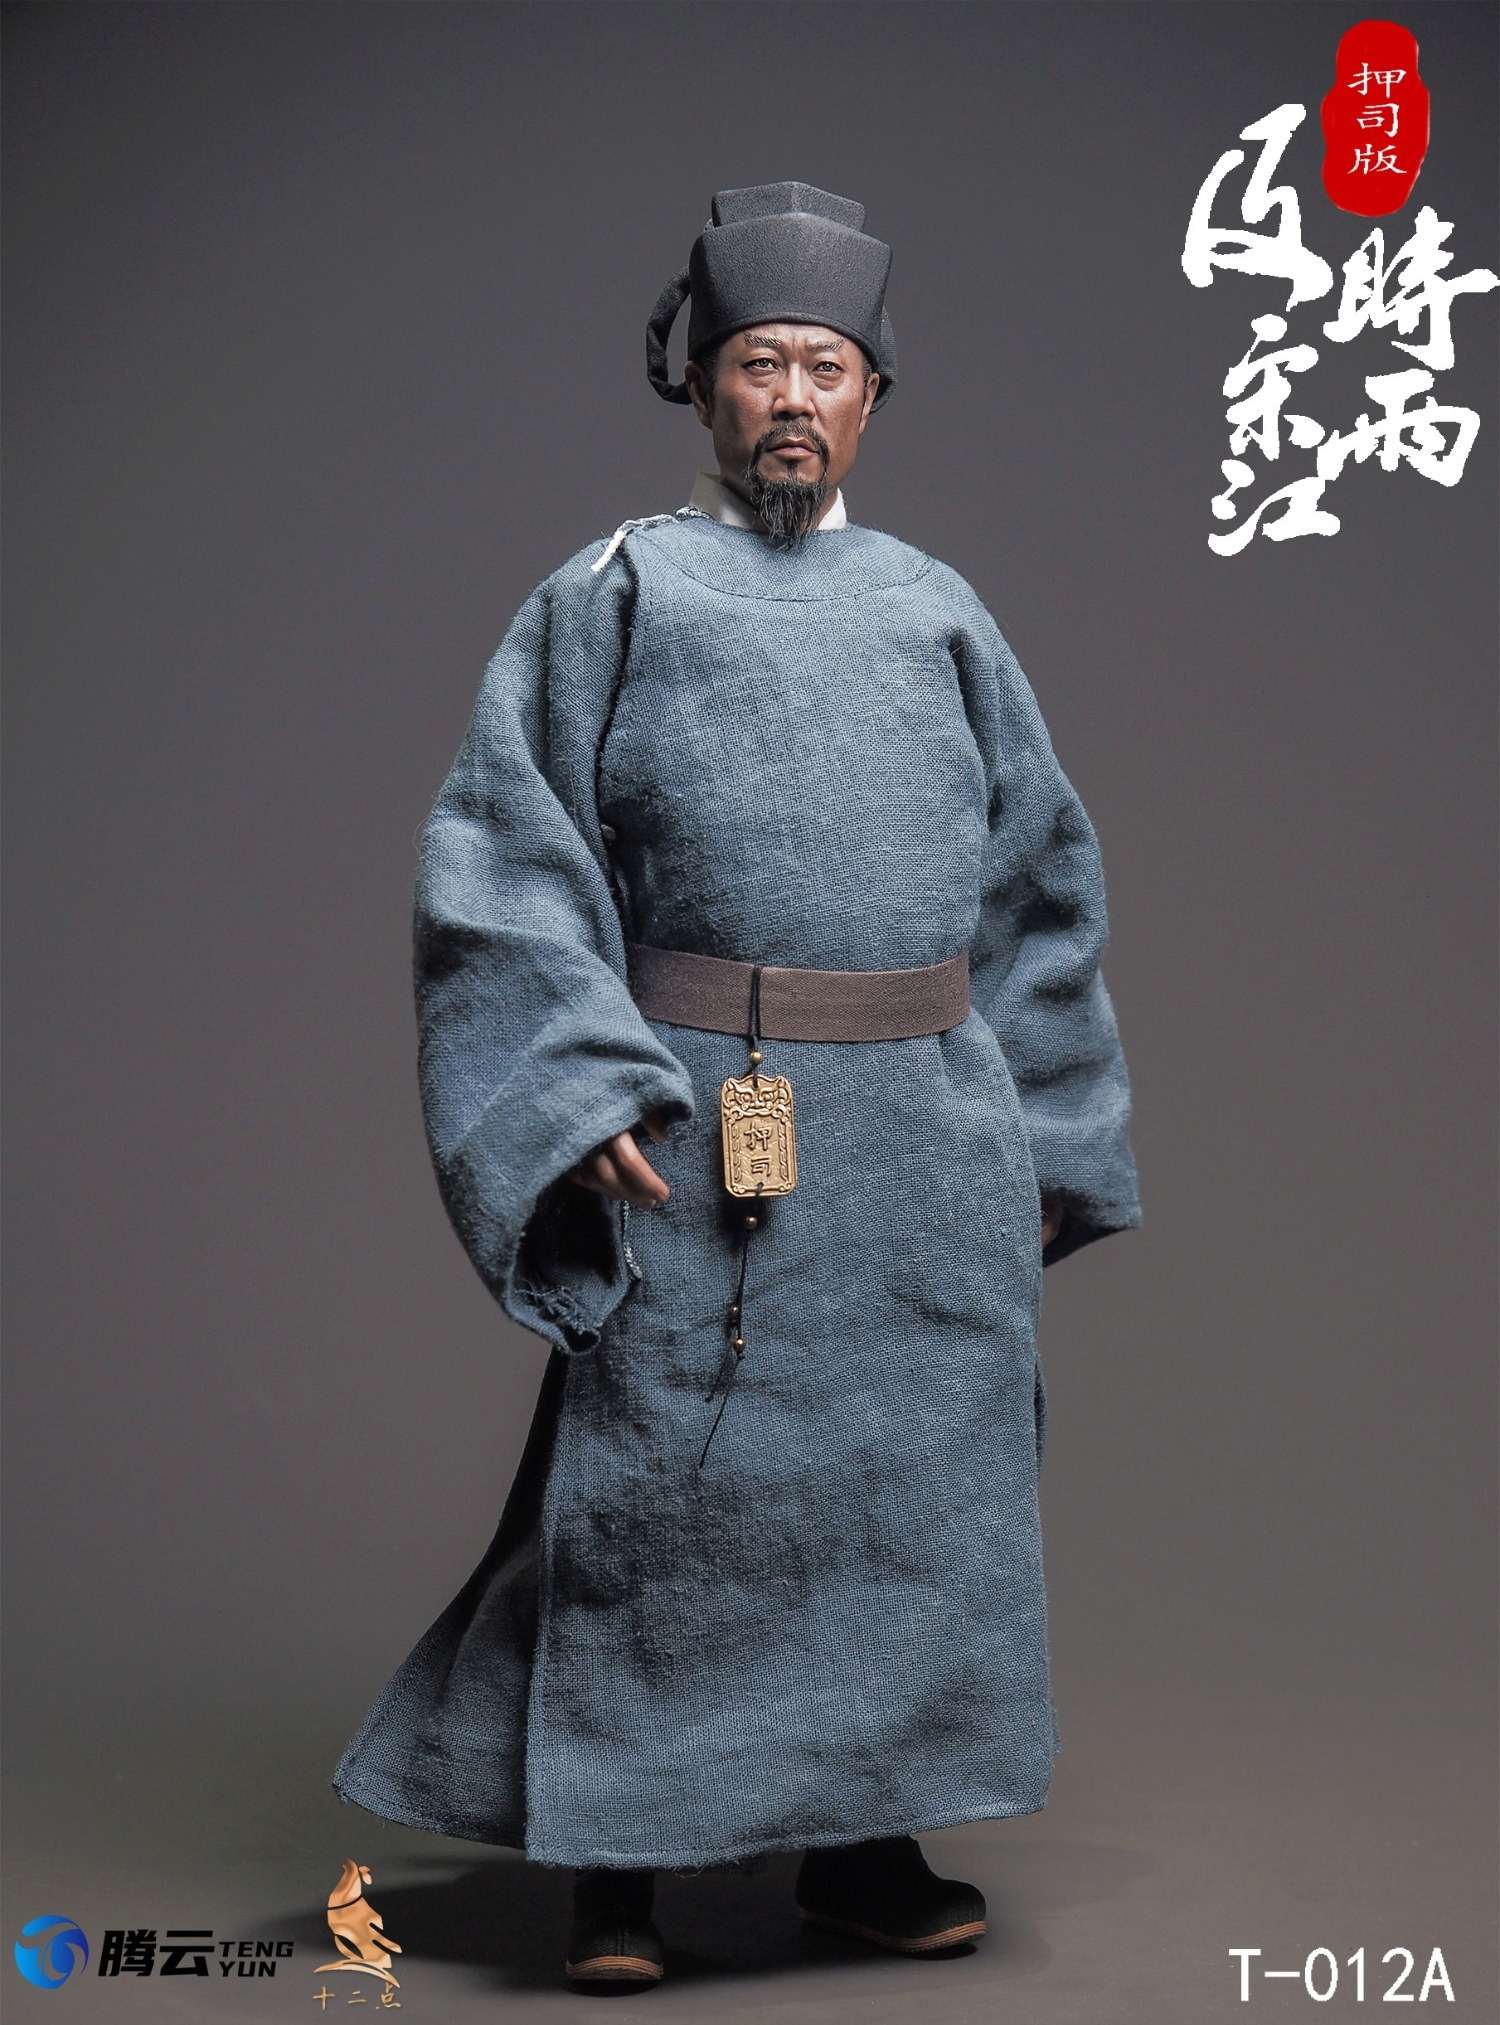 T-012A - NEW PRODUCT: Twelve O'Clock - Hero Series - Timely Rain Song Jiang (Oshi Version / Leader Version) #T-012A/B/C/D 08104